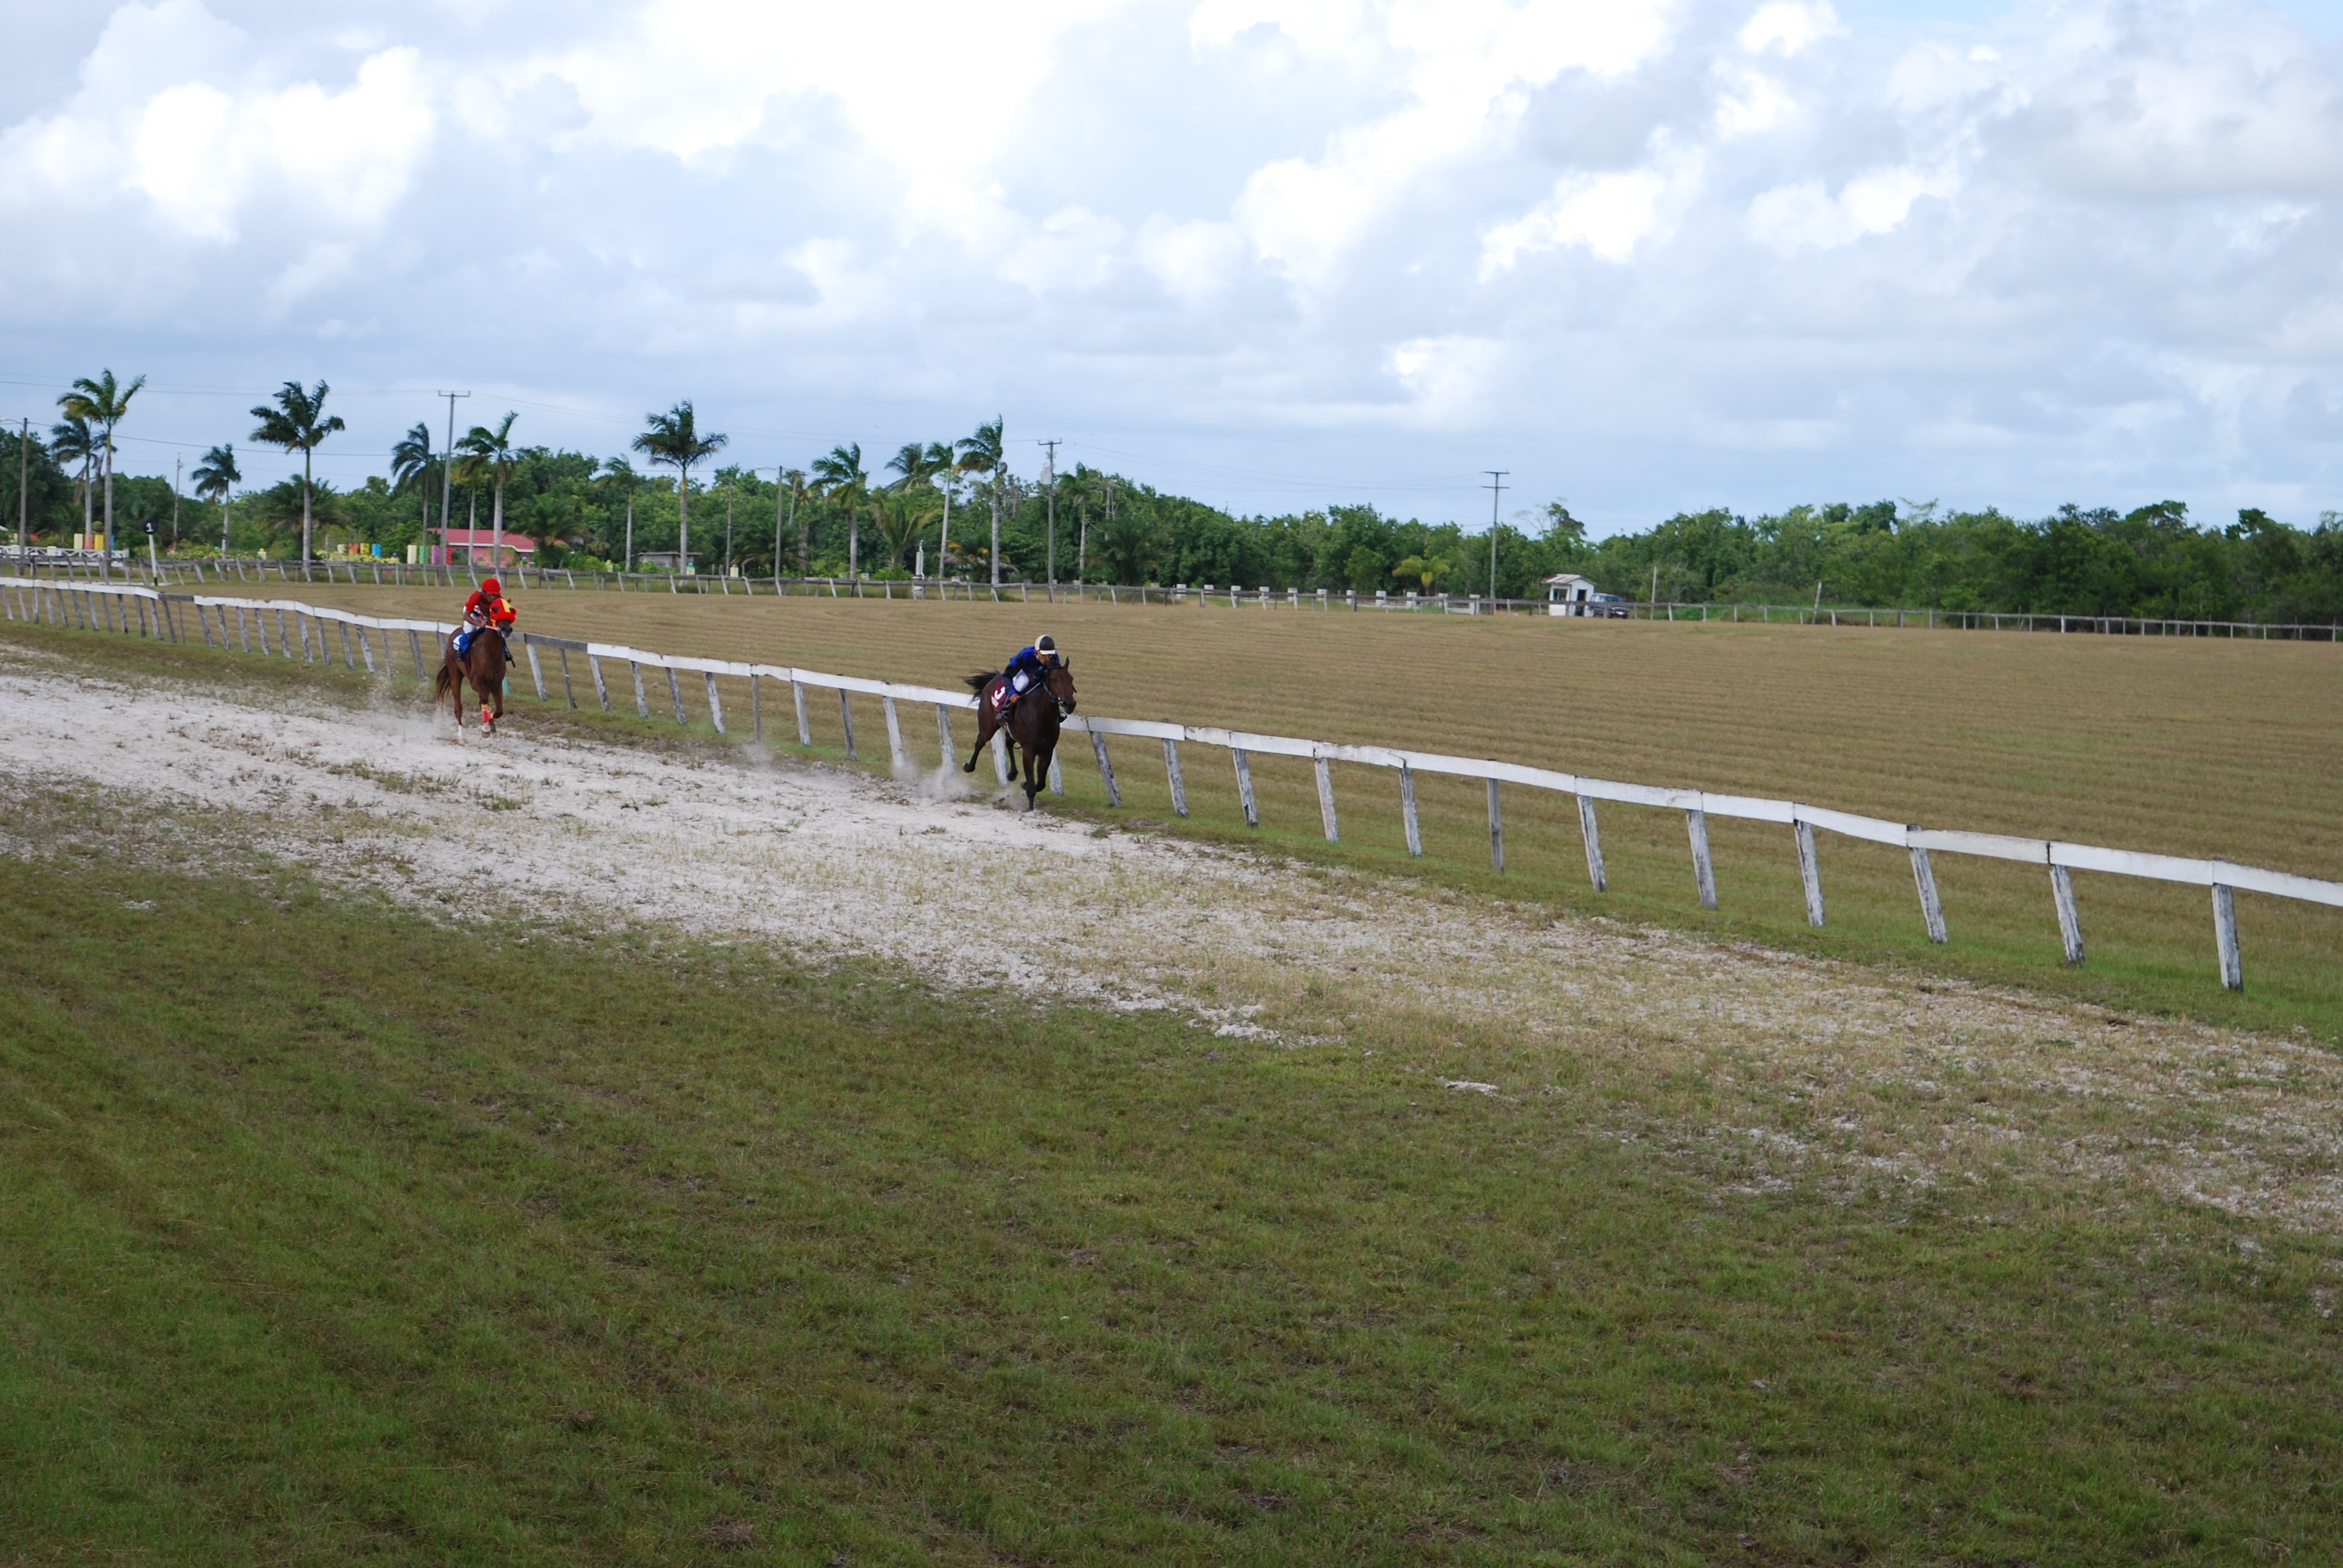 https://horseracingbelize.com/Cataleya of the Russel Stables wins the Derby for Untried Upgraded Two Year Olds.